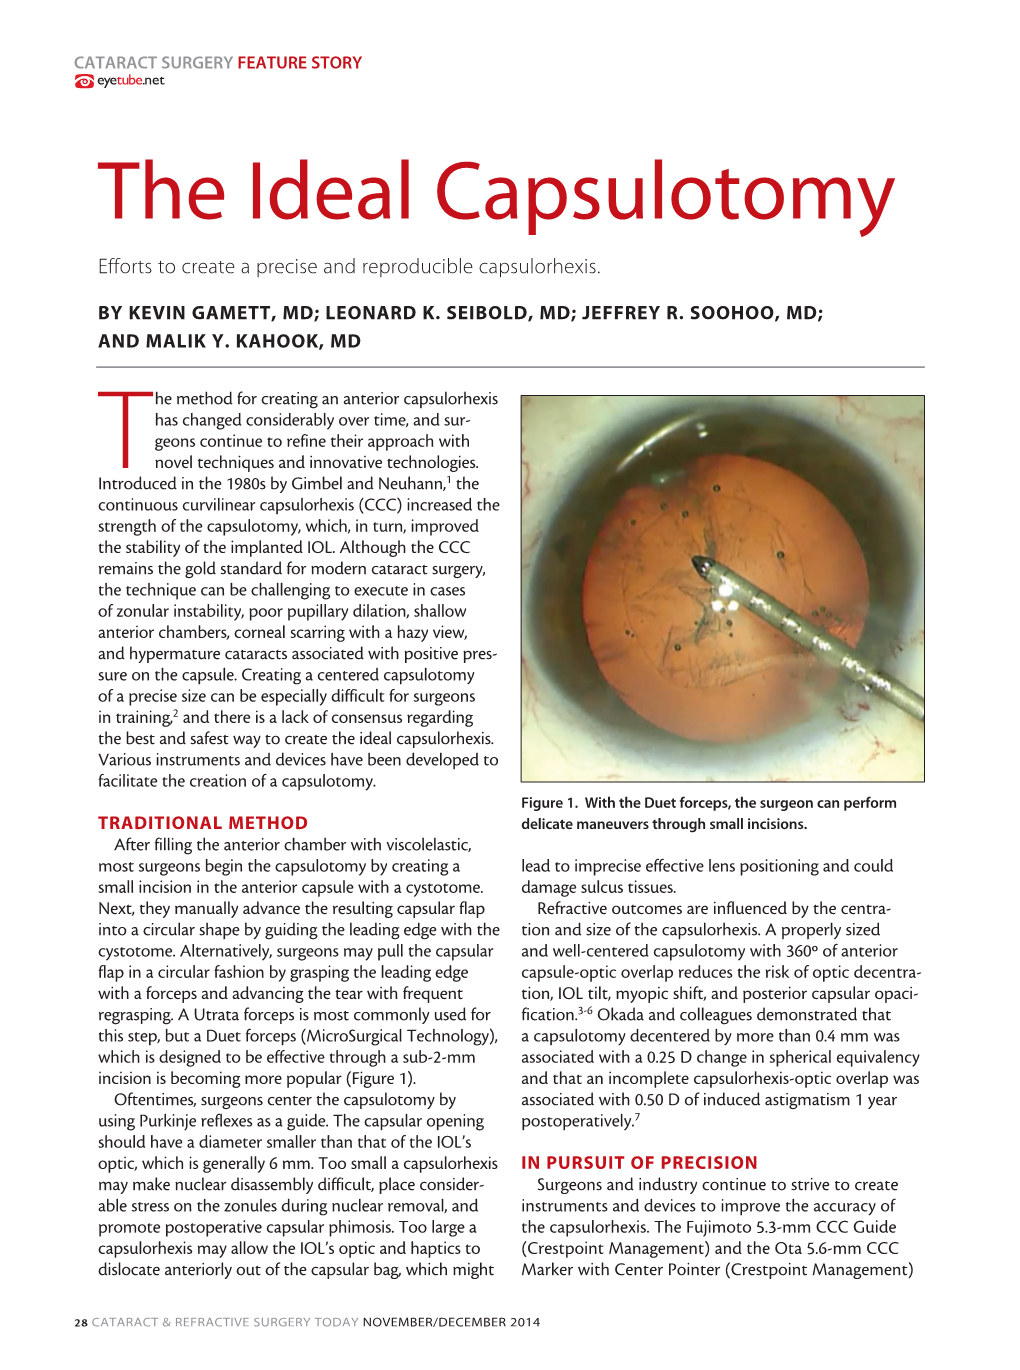 The Ideal Capsulotomy Efforts to Create a Precise and Reproducible Capsulorhexis